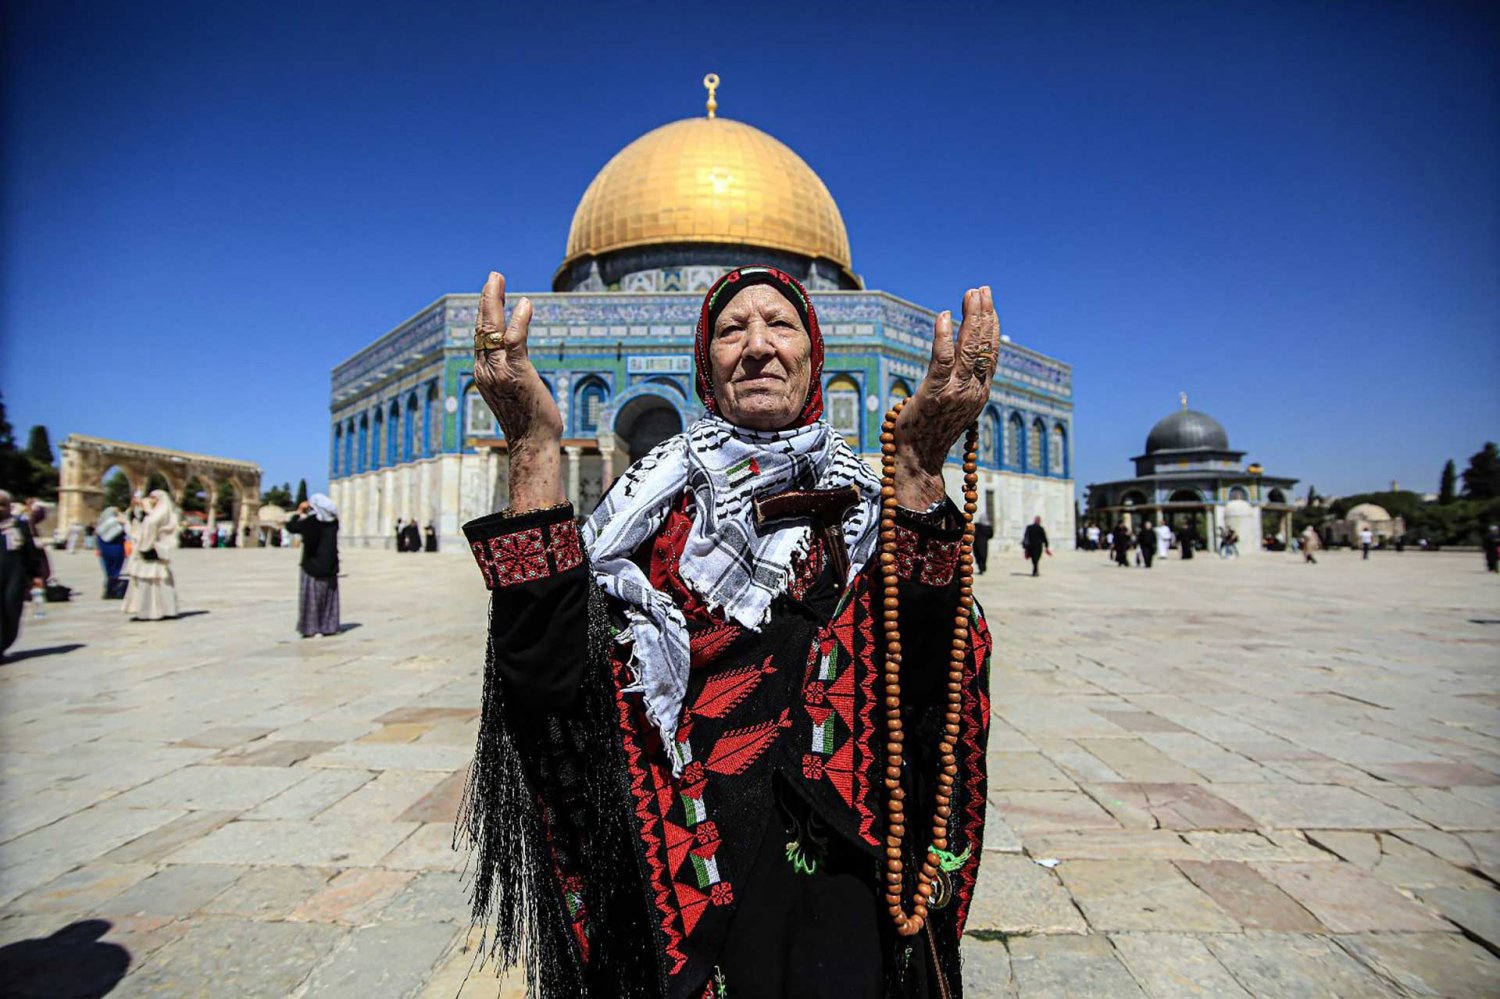 A Palestinian Jerusalemite reflects on the Prophet Muhammad's birthday at al-Aqsa Mosque in Jerusalem